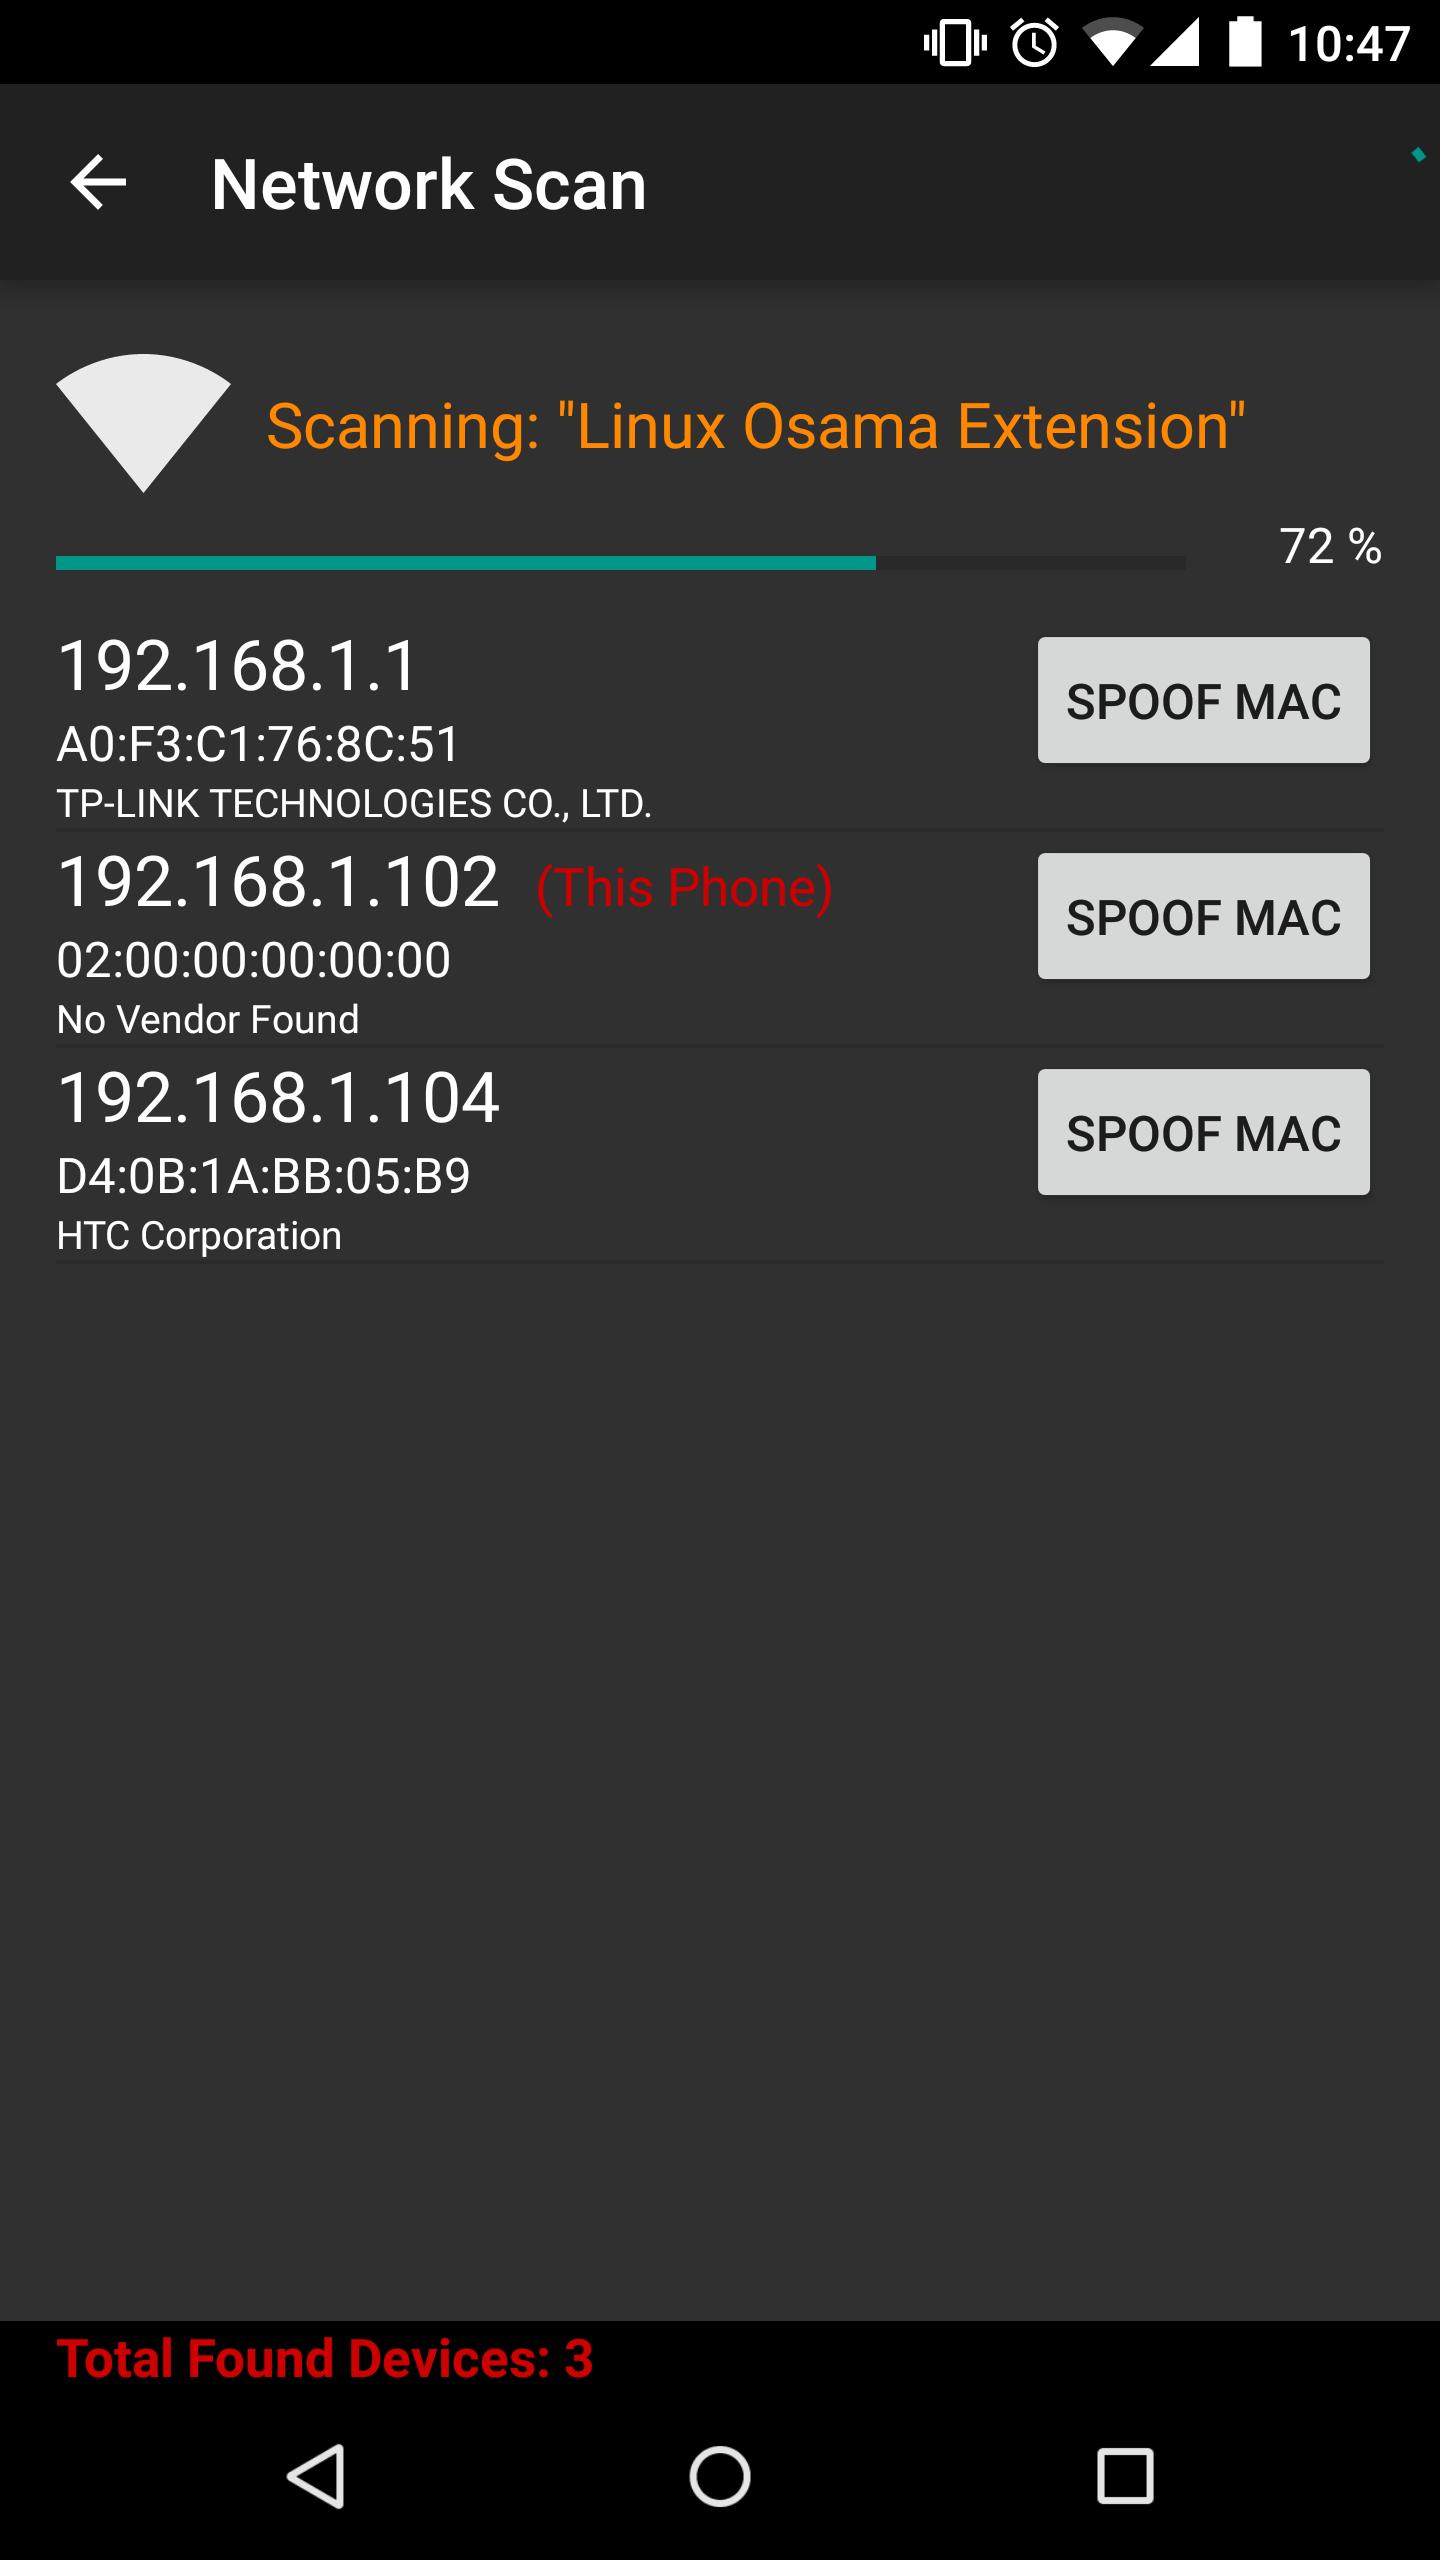 Mac Spoofing App For Android